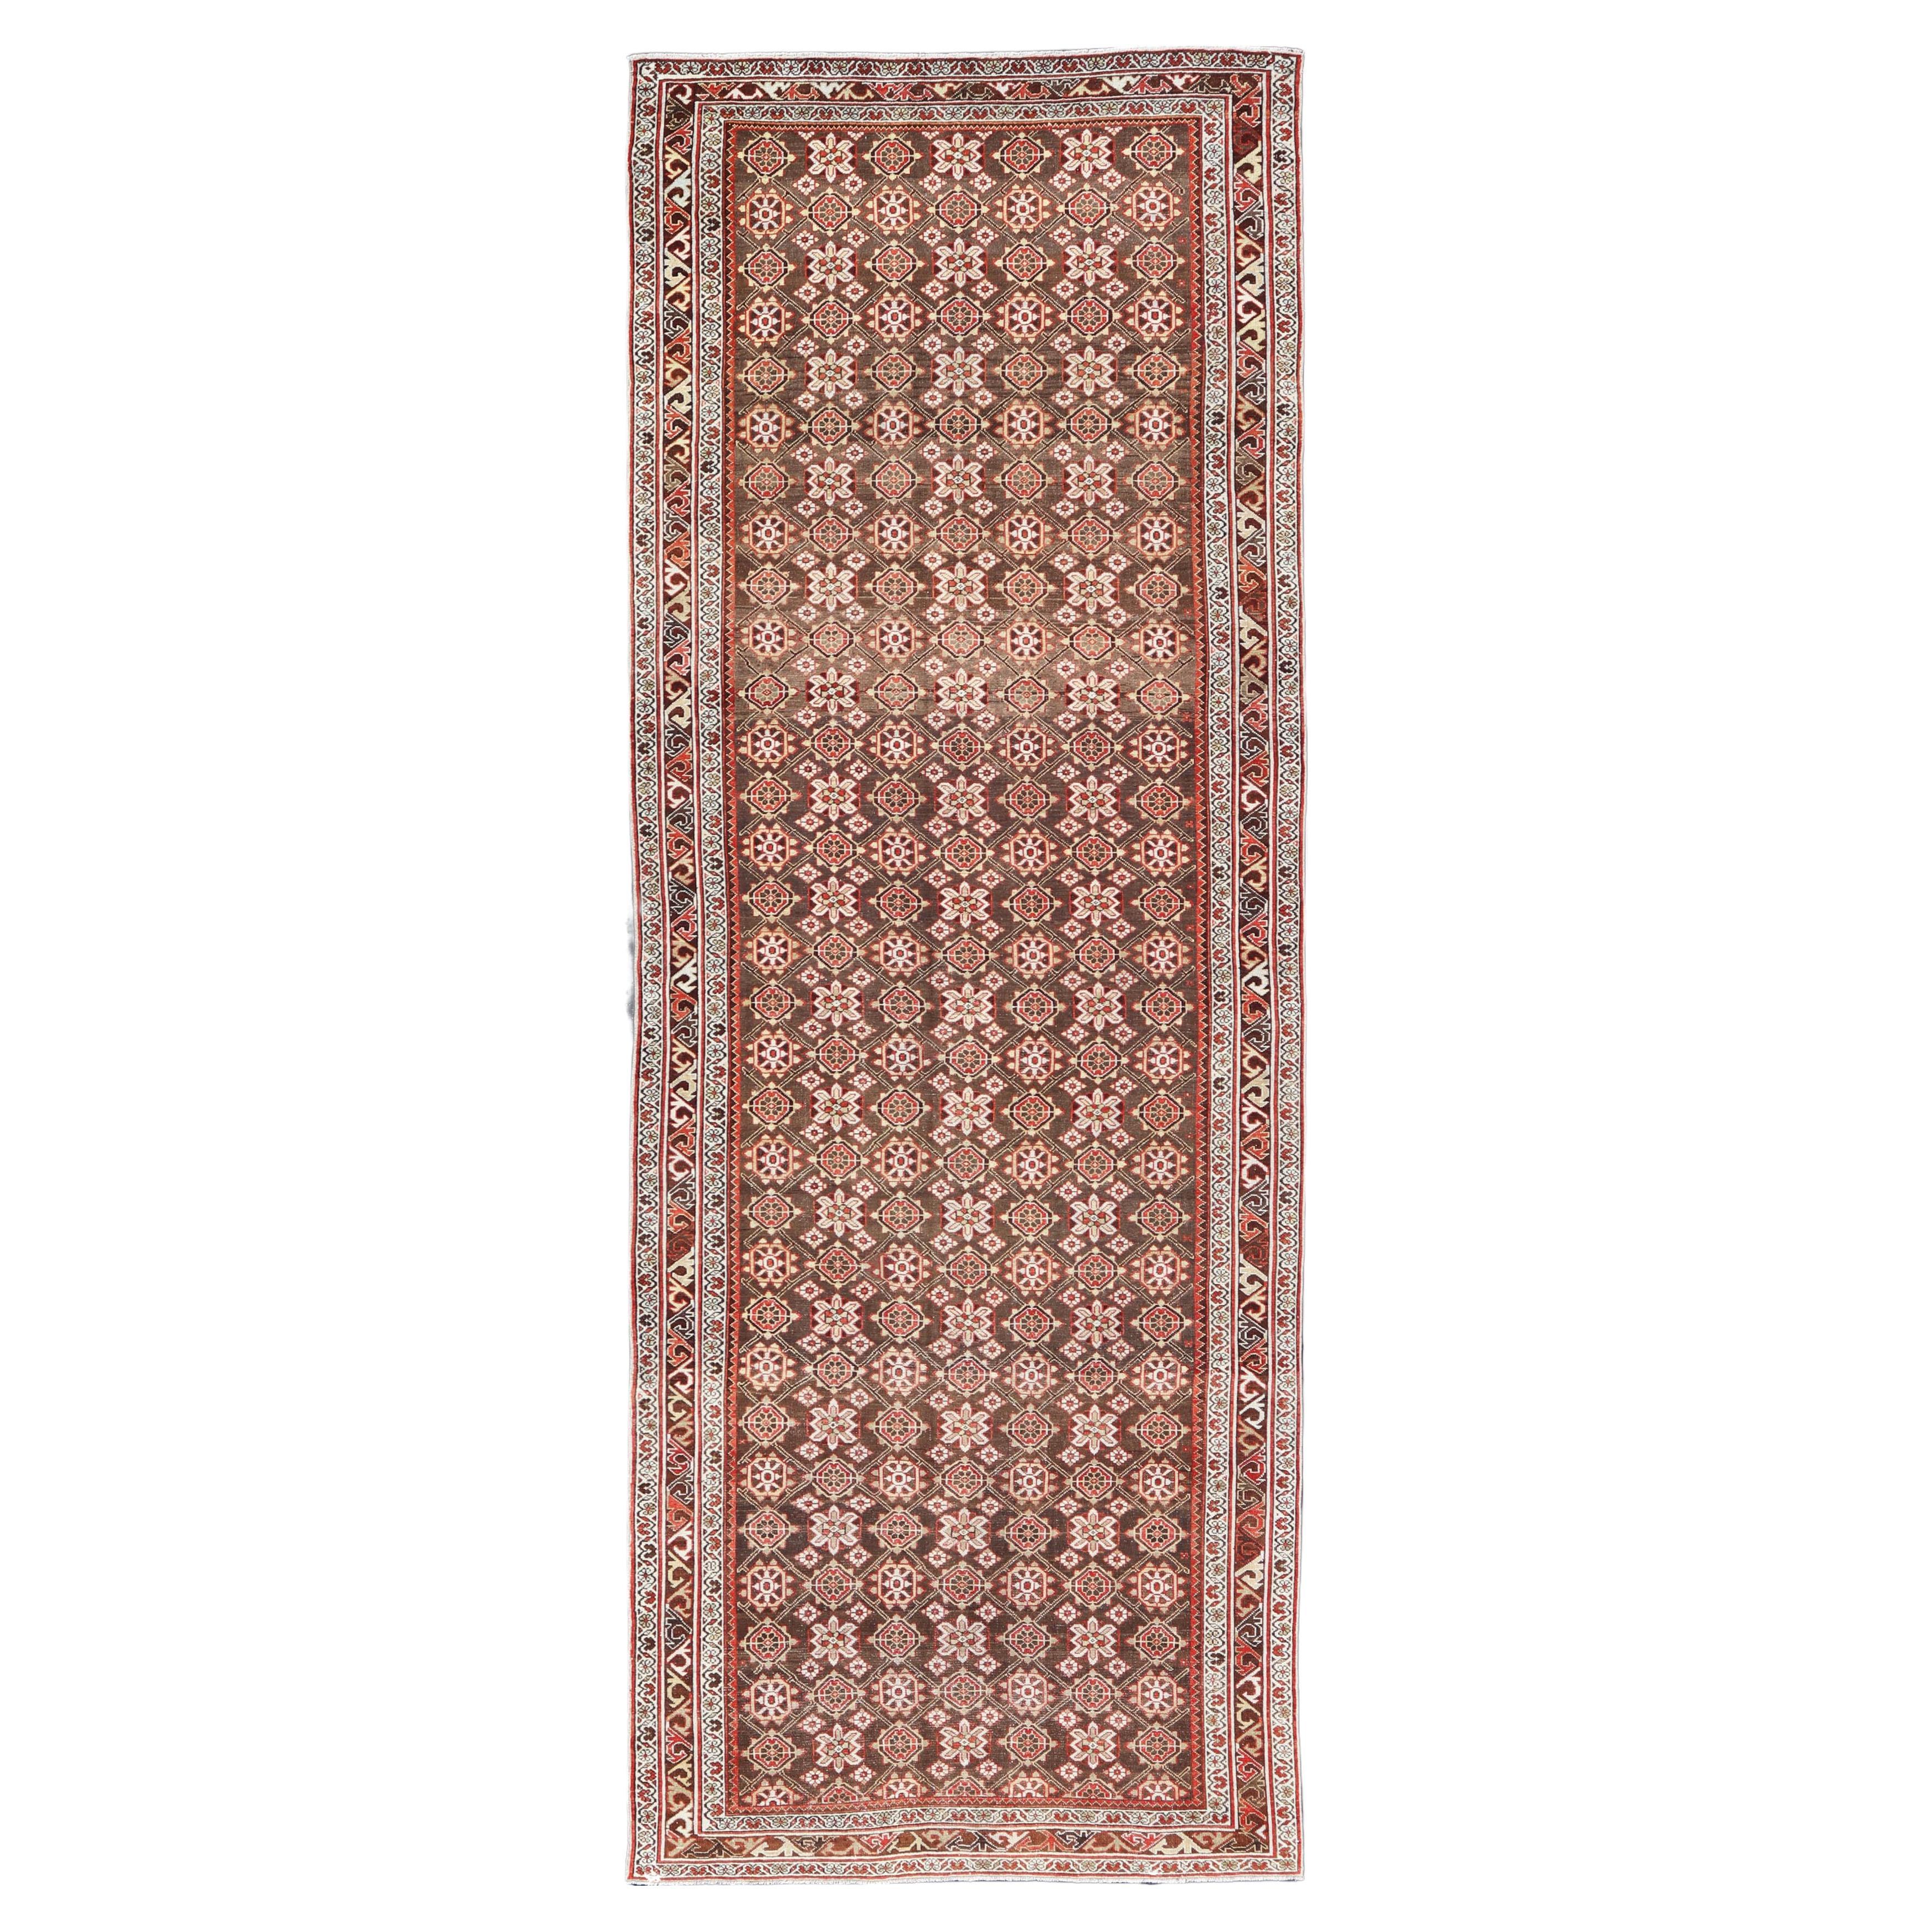 Antique Malayer Persian Gallery Runner with All Over Floral Design